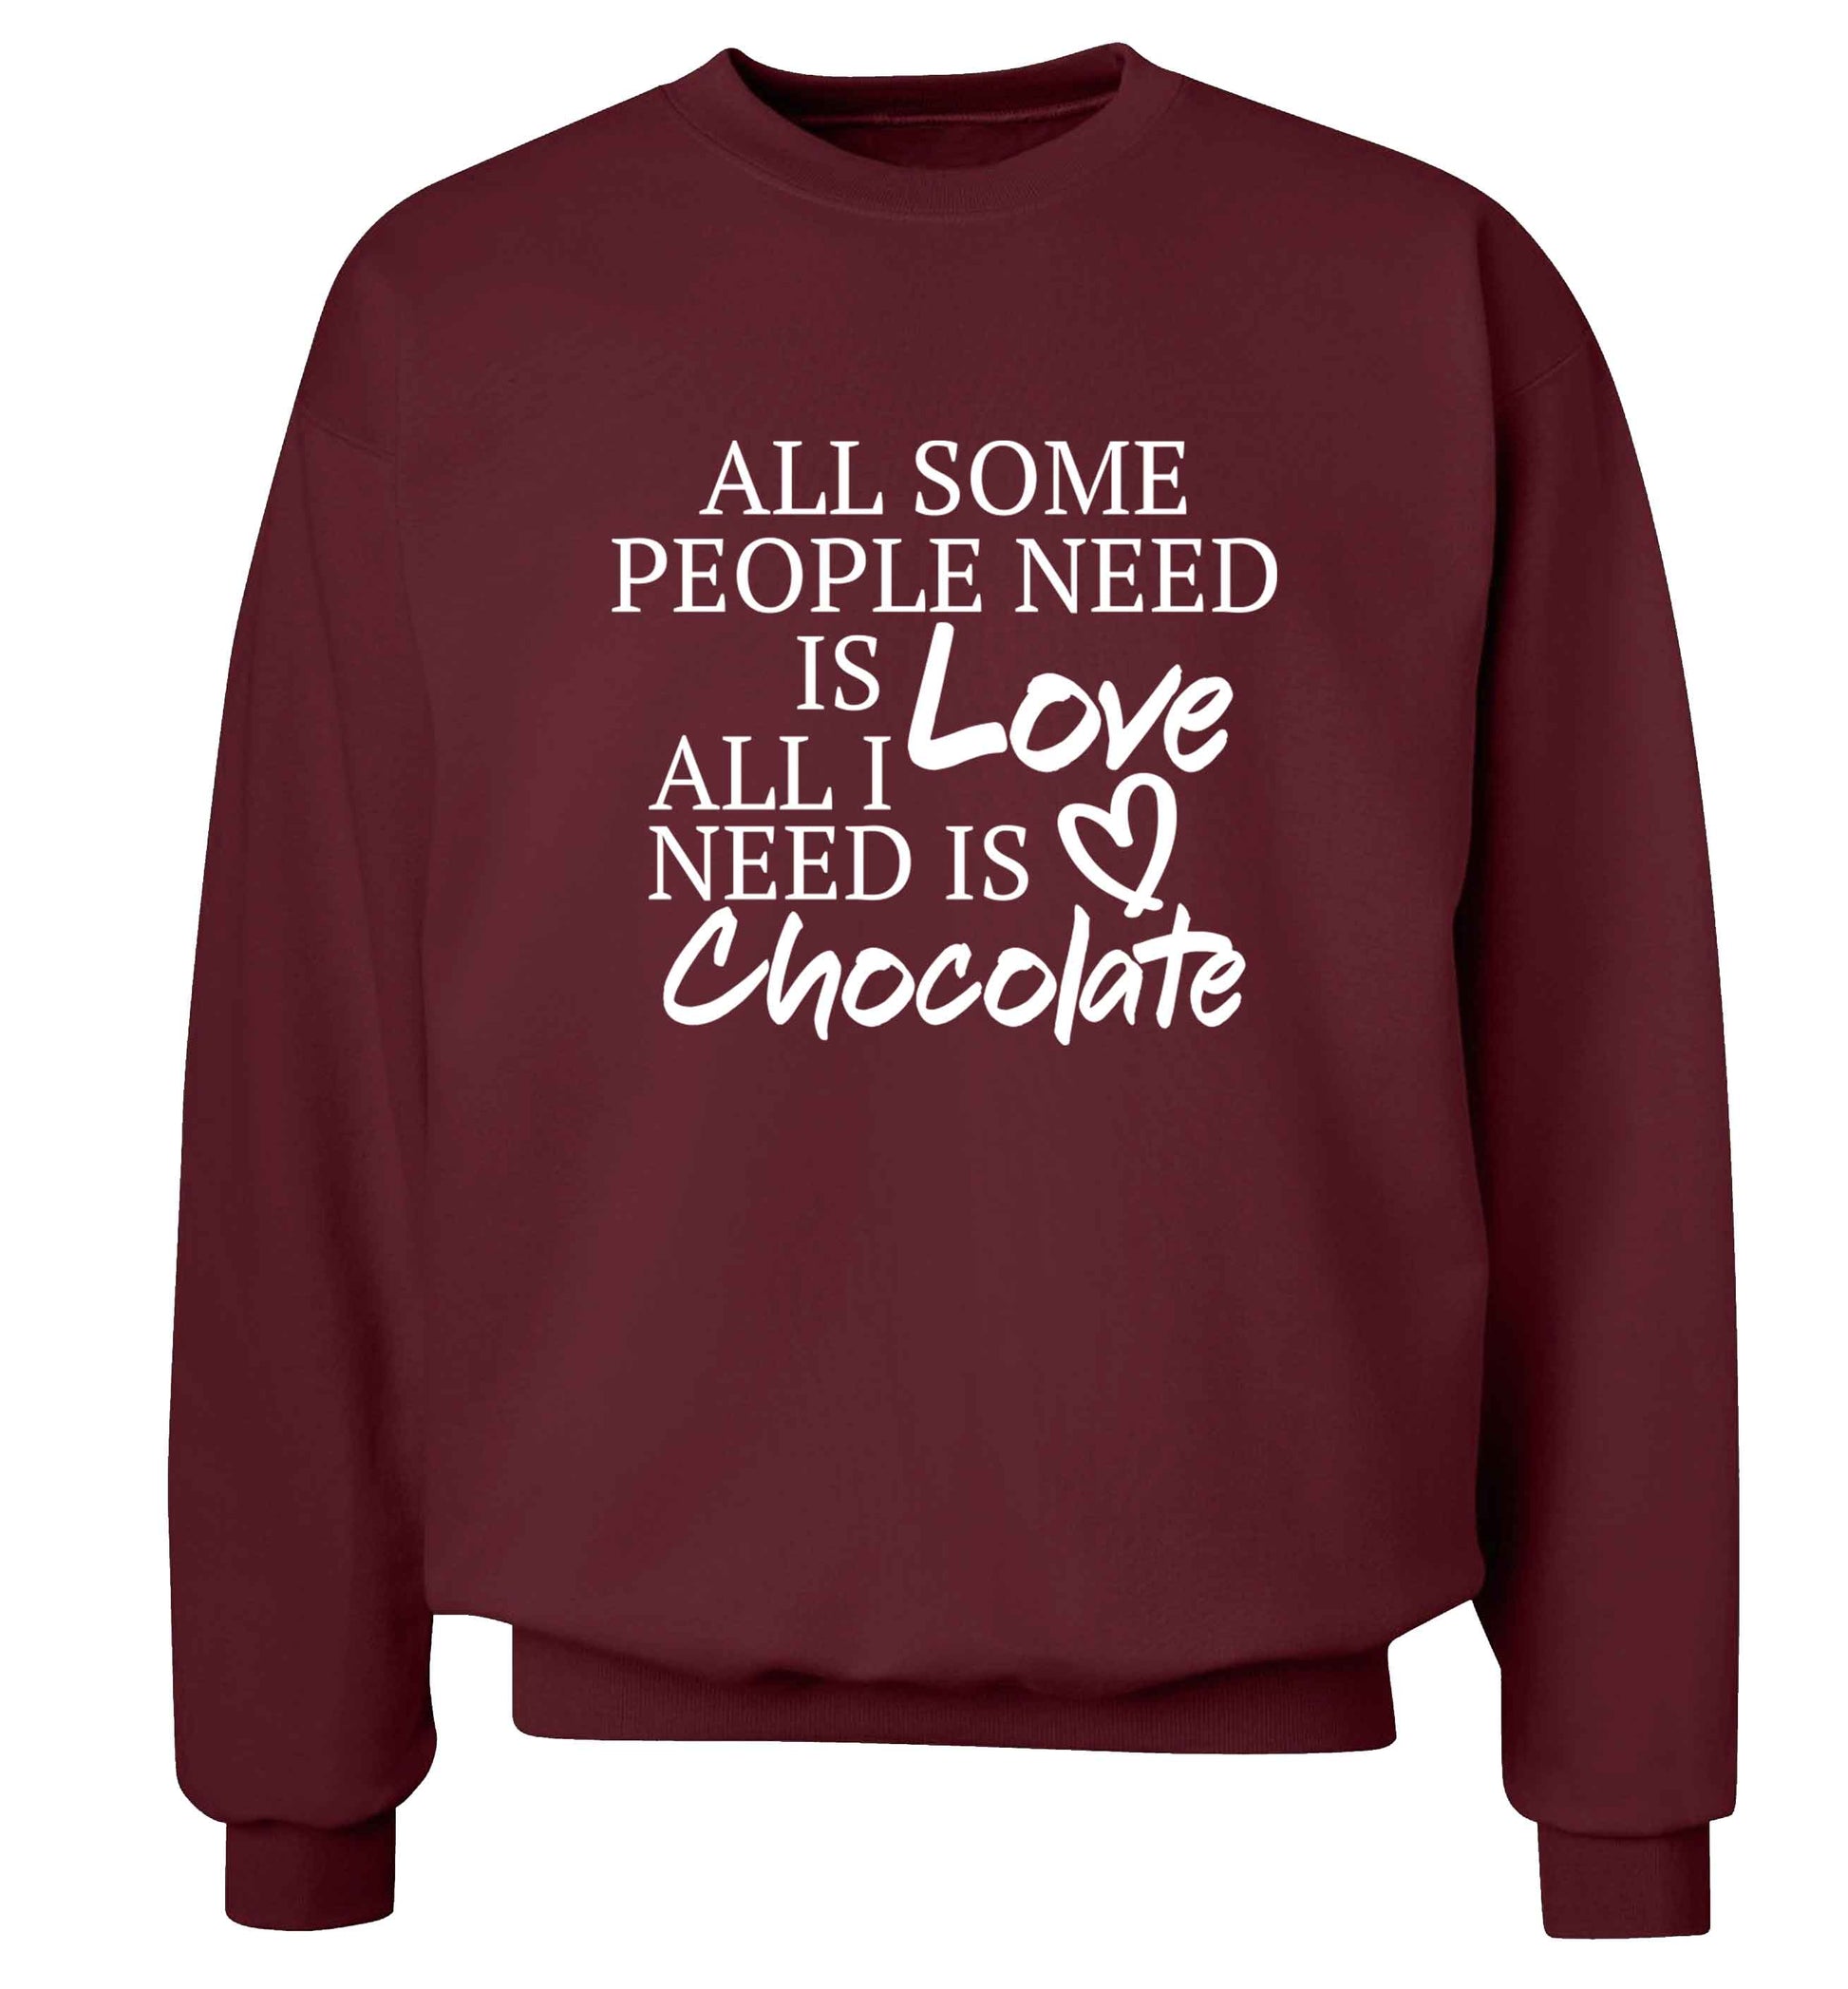 All some people need is love all I need is chocolate adult's unisex maroon sweater 2XL